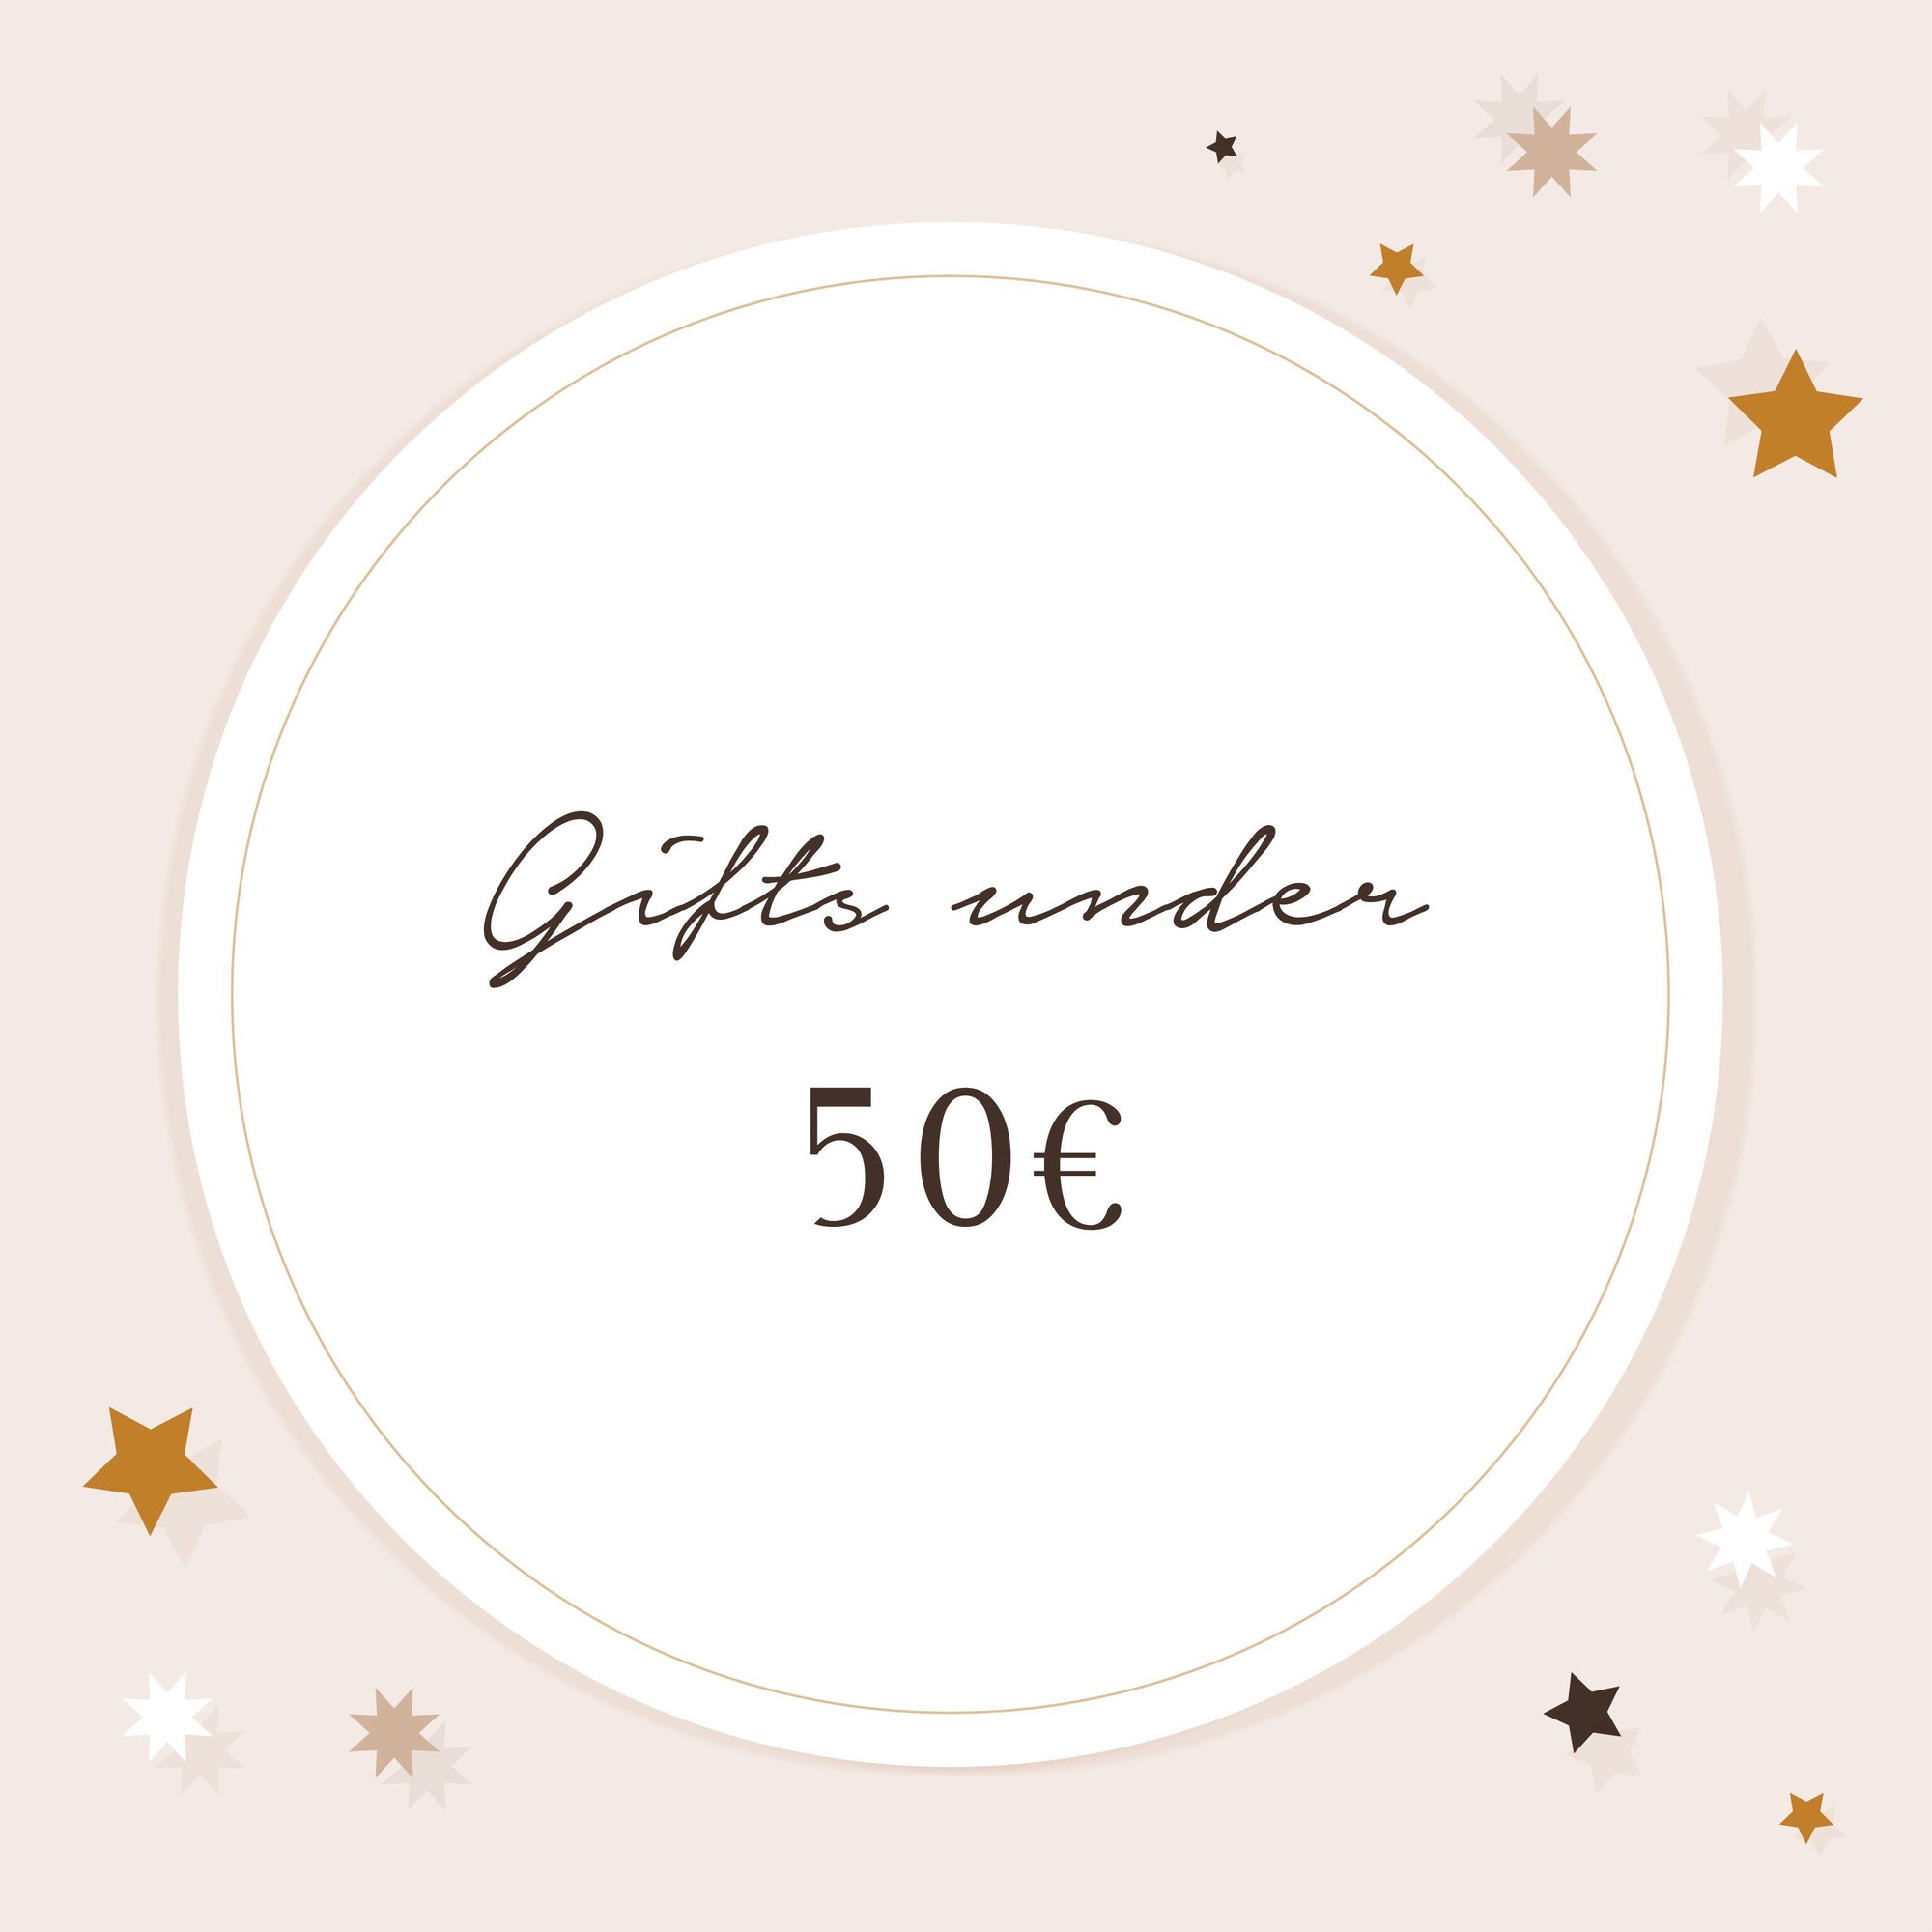 Gifts under 50€ - Genuine Selection